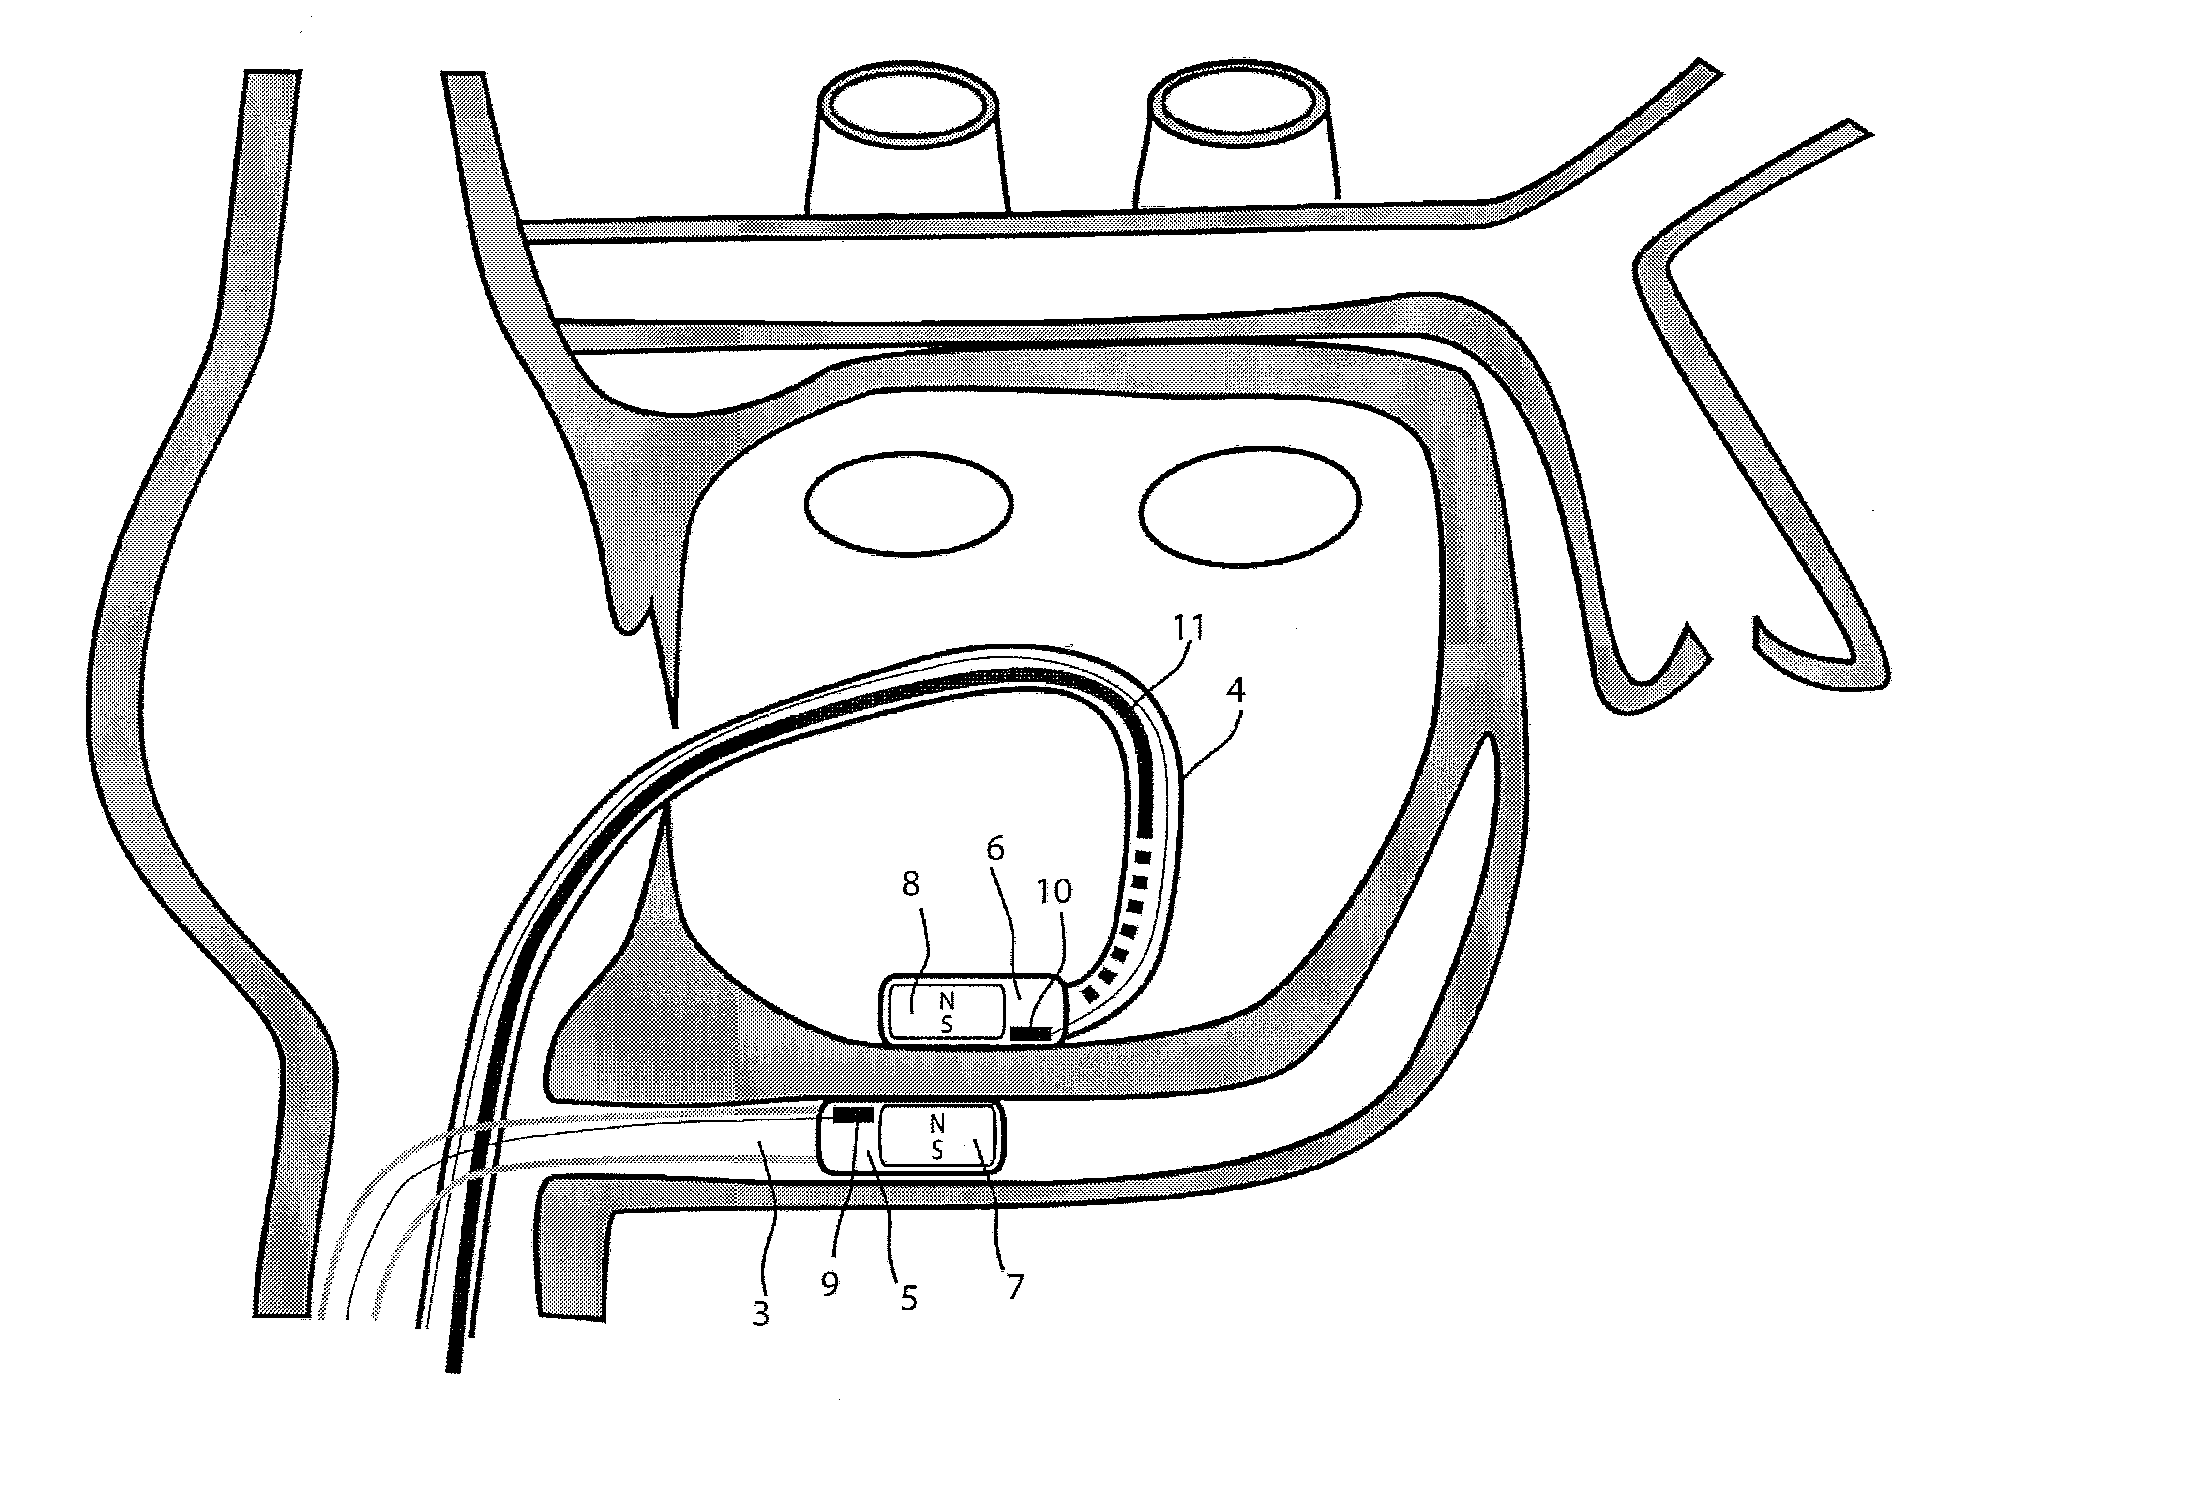 Medical device for tissue ablation